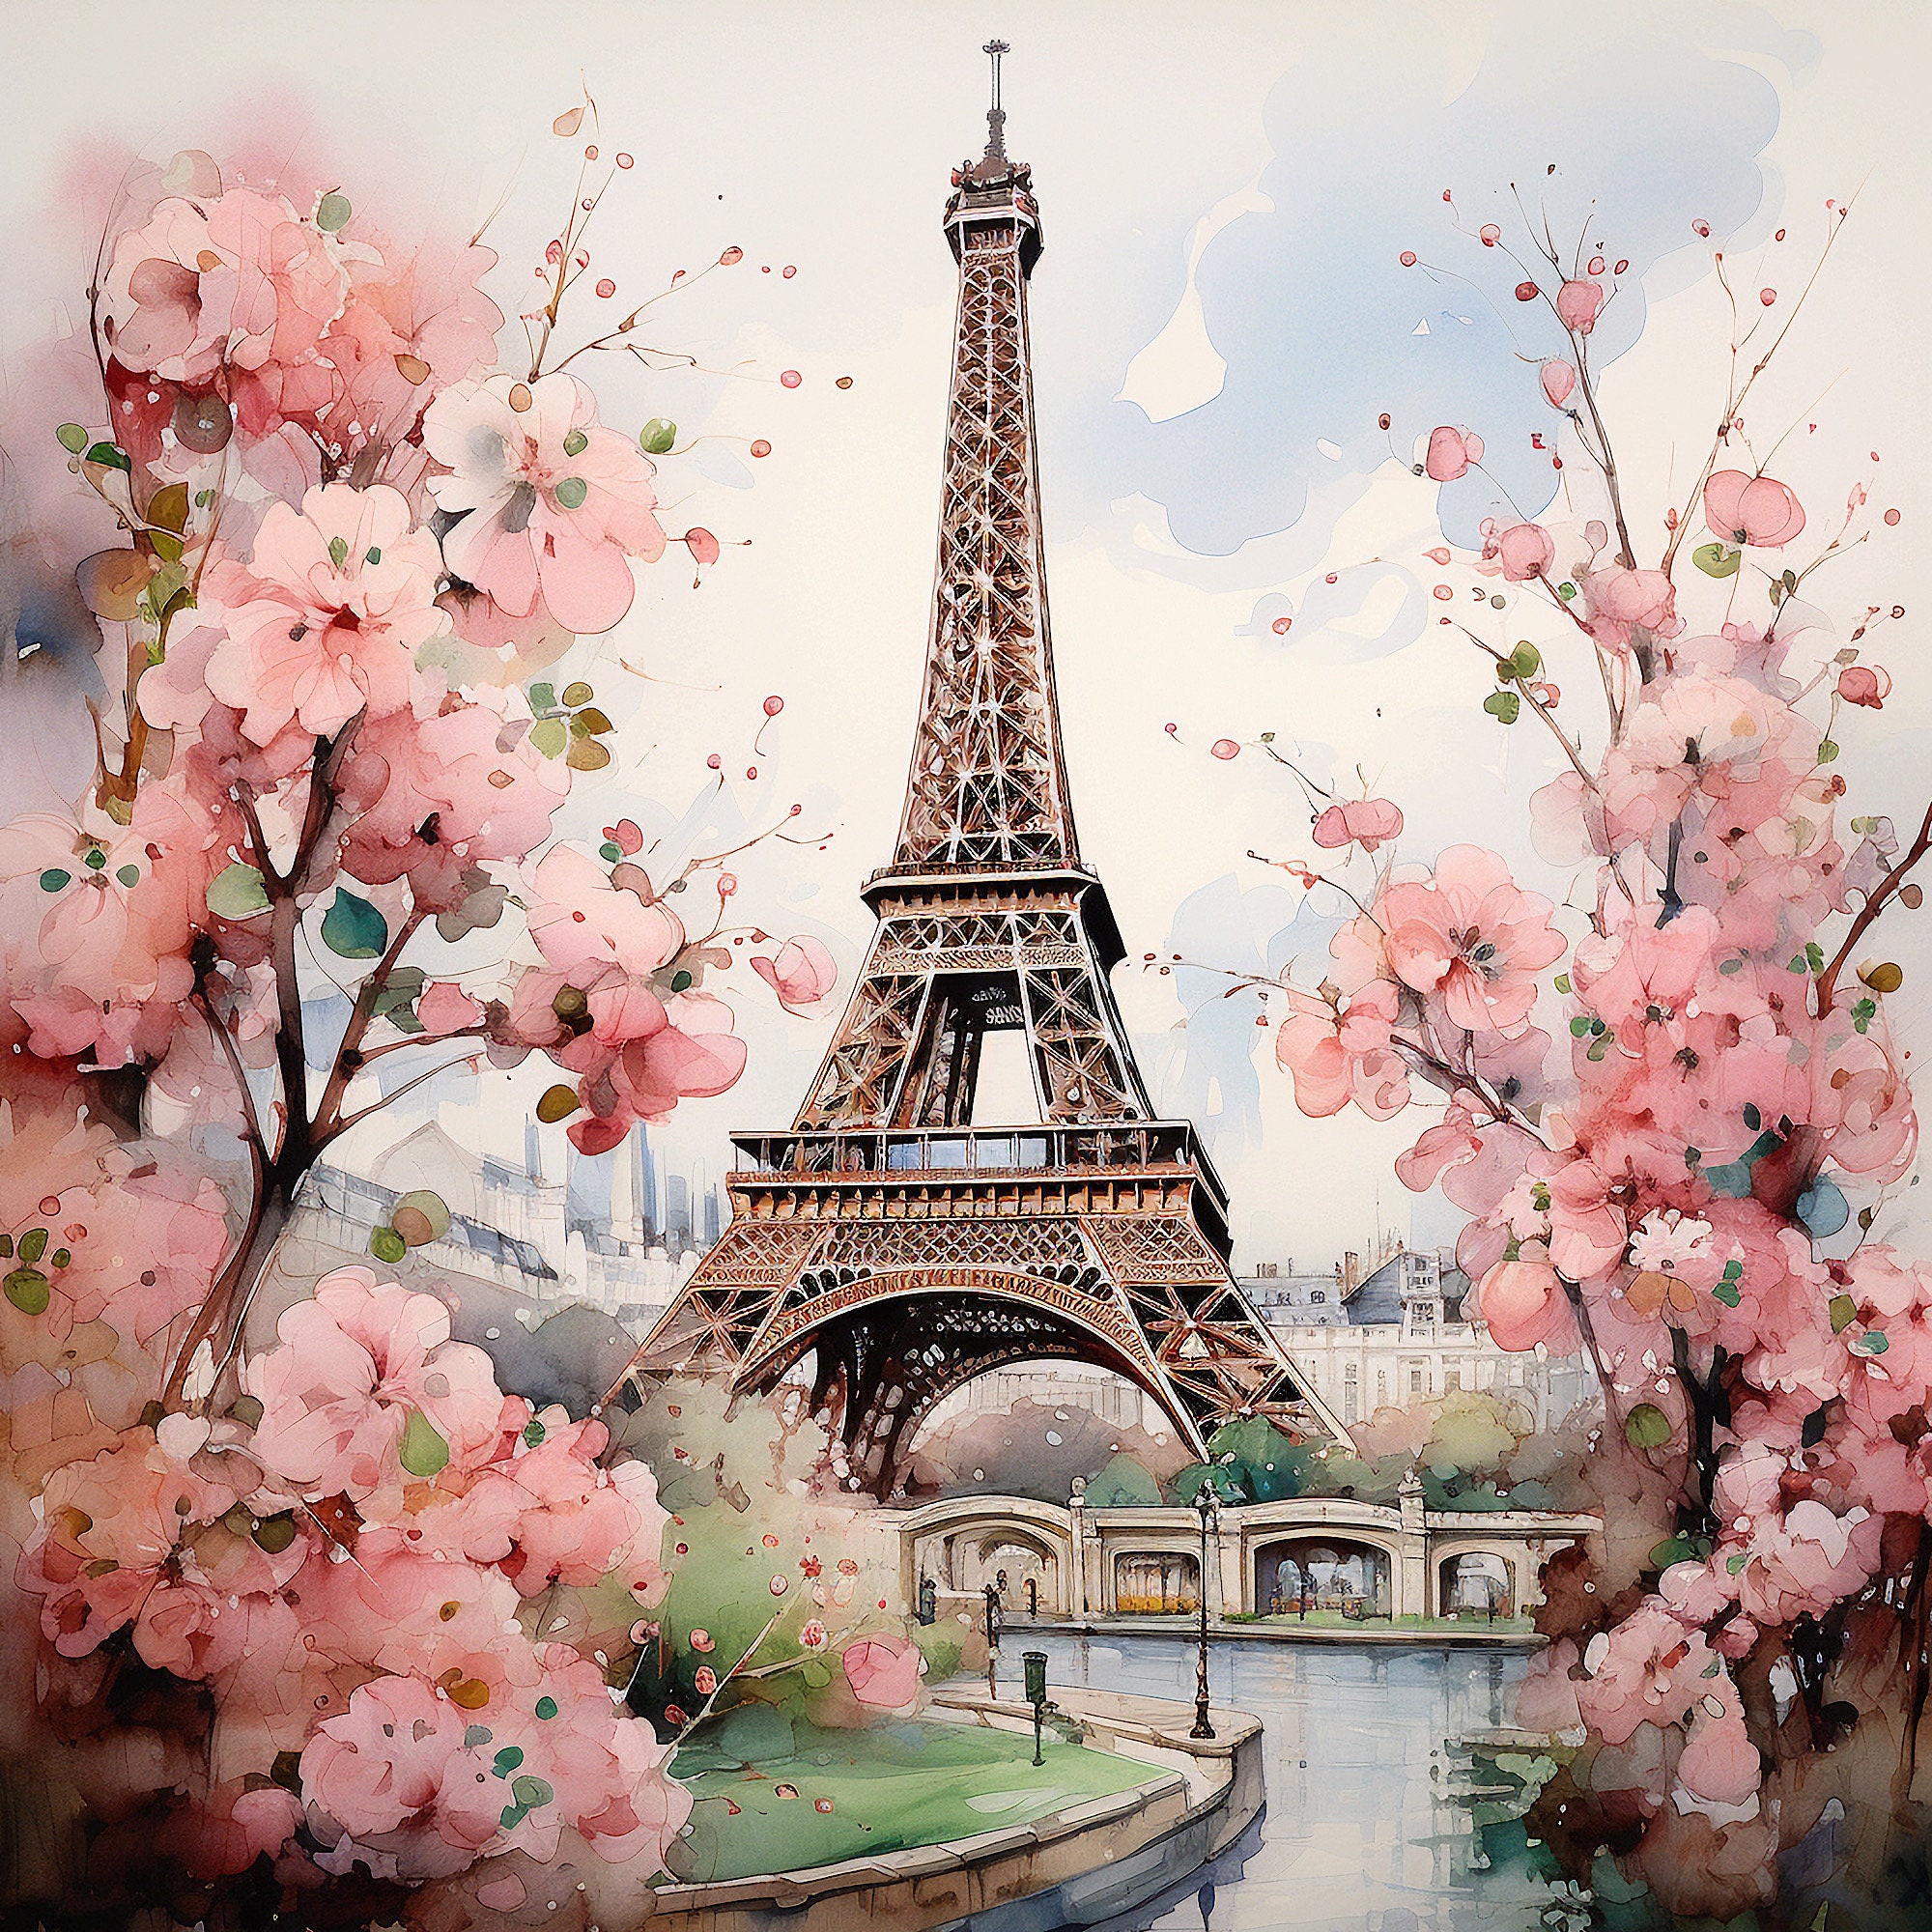 Wedding Decoration with Pink Roses on Eiffel Tower Miniature. Elegant and  Luxurious Event Arrangement with La Tour Eiffel Stock Image - Image of  love, flower: 58401585